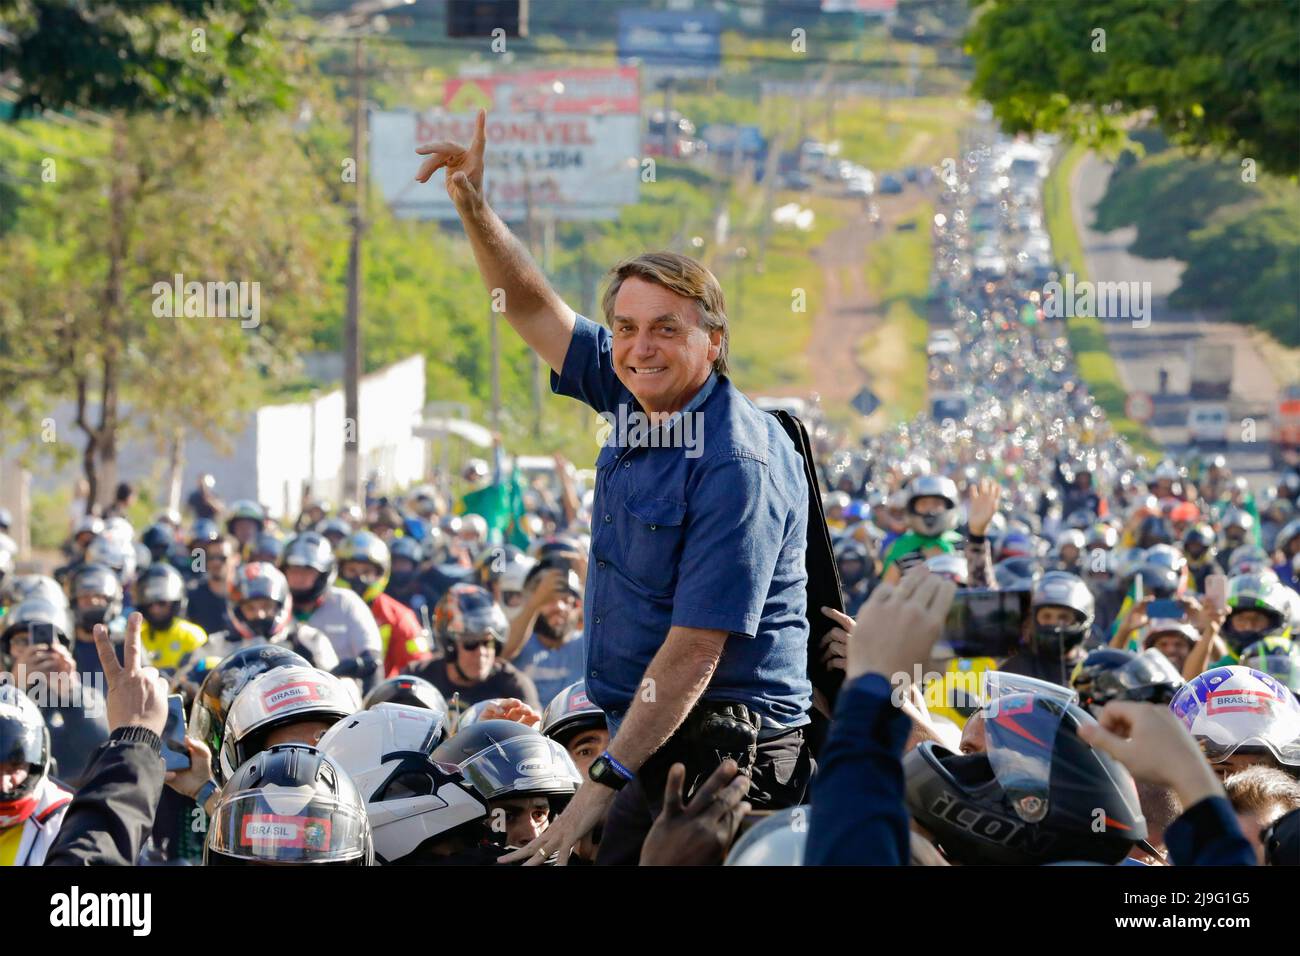 Maringa, Brazil. 11 May, 2022. Brazilian President Jair Bolsonaro, center, waves as he is carried by the crowds after arriving by motorcycle at the 48th Expoinga Agricultural fair at the Francisco Feio Ribeiro Expo Center, May 11, 2022 in Maringa, Brazil. Credit: Alan Santos/President Brazil/Alamy Live News Stock Photo